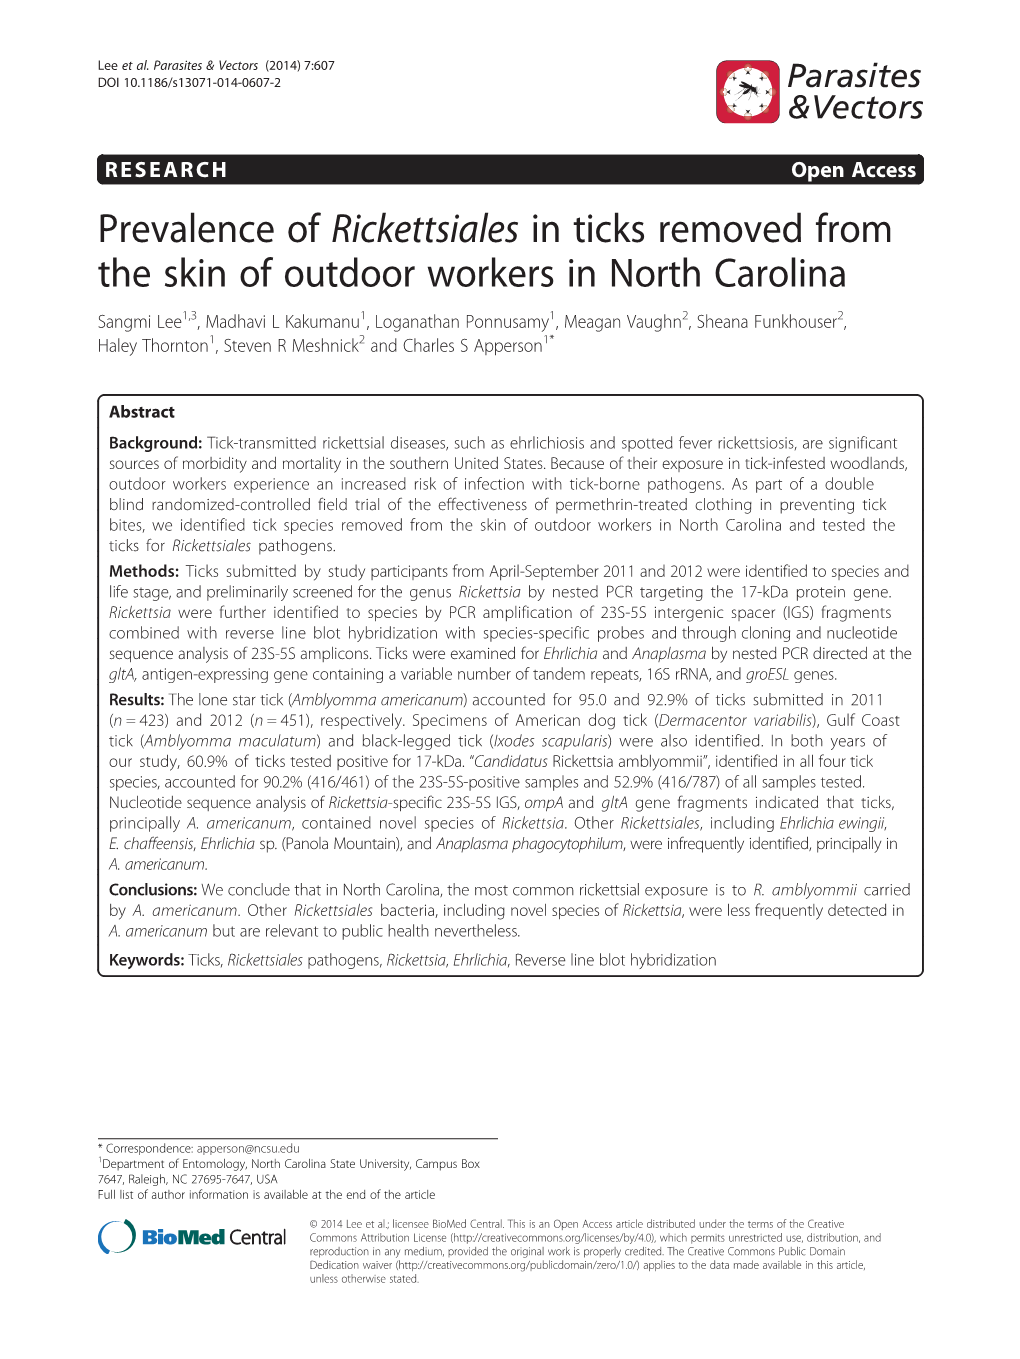 Prevalence of Rickettsiales in Ticks Removed from the Skin of Outdoor Workers in North Carolina